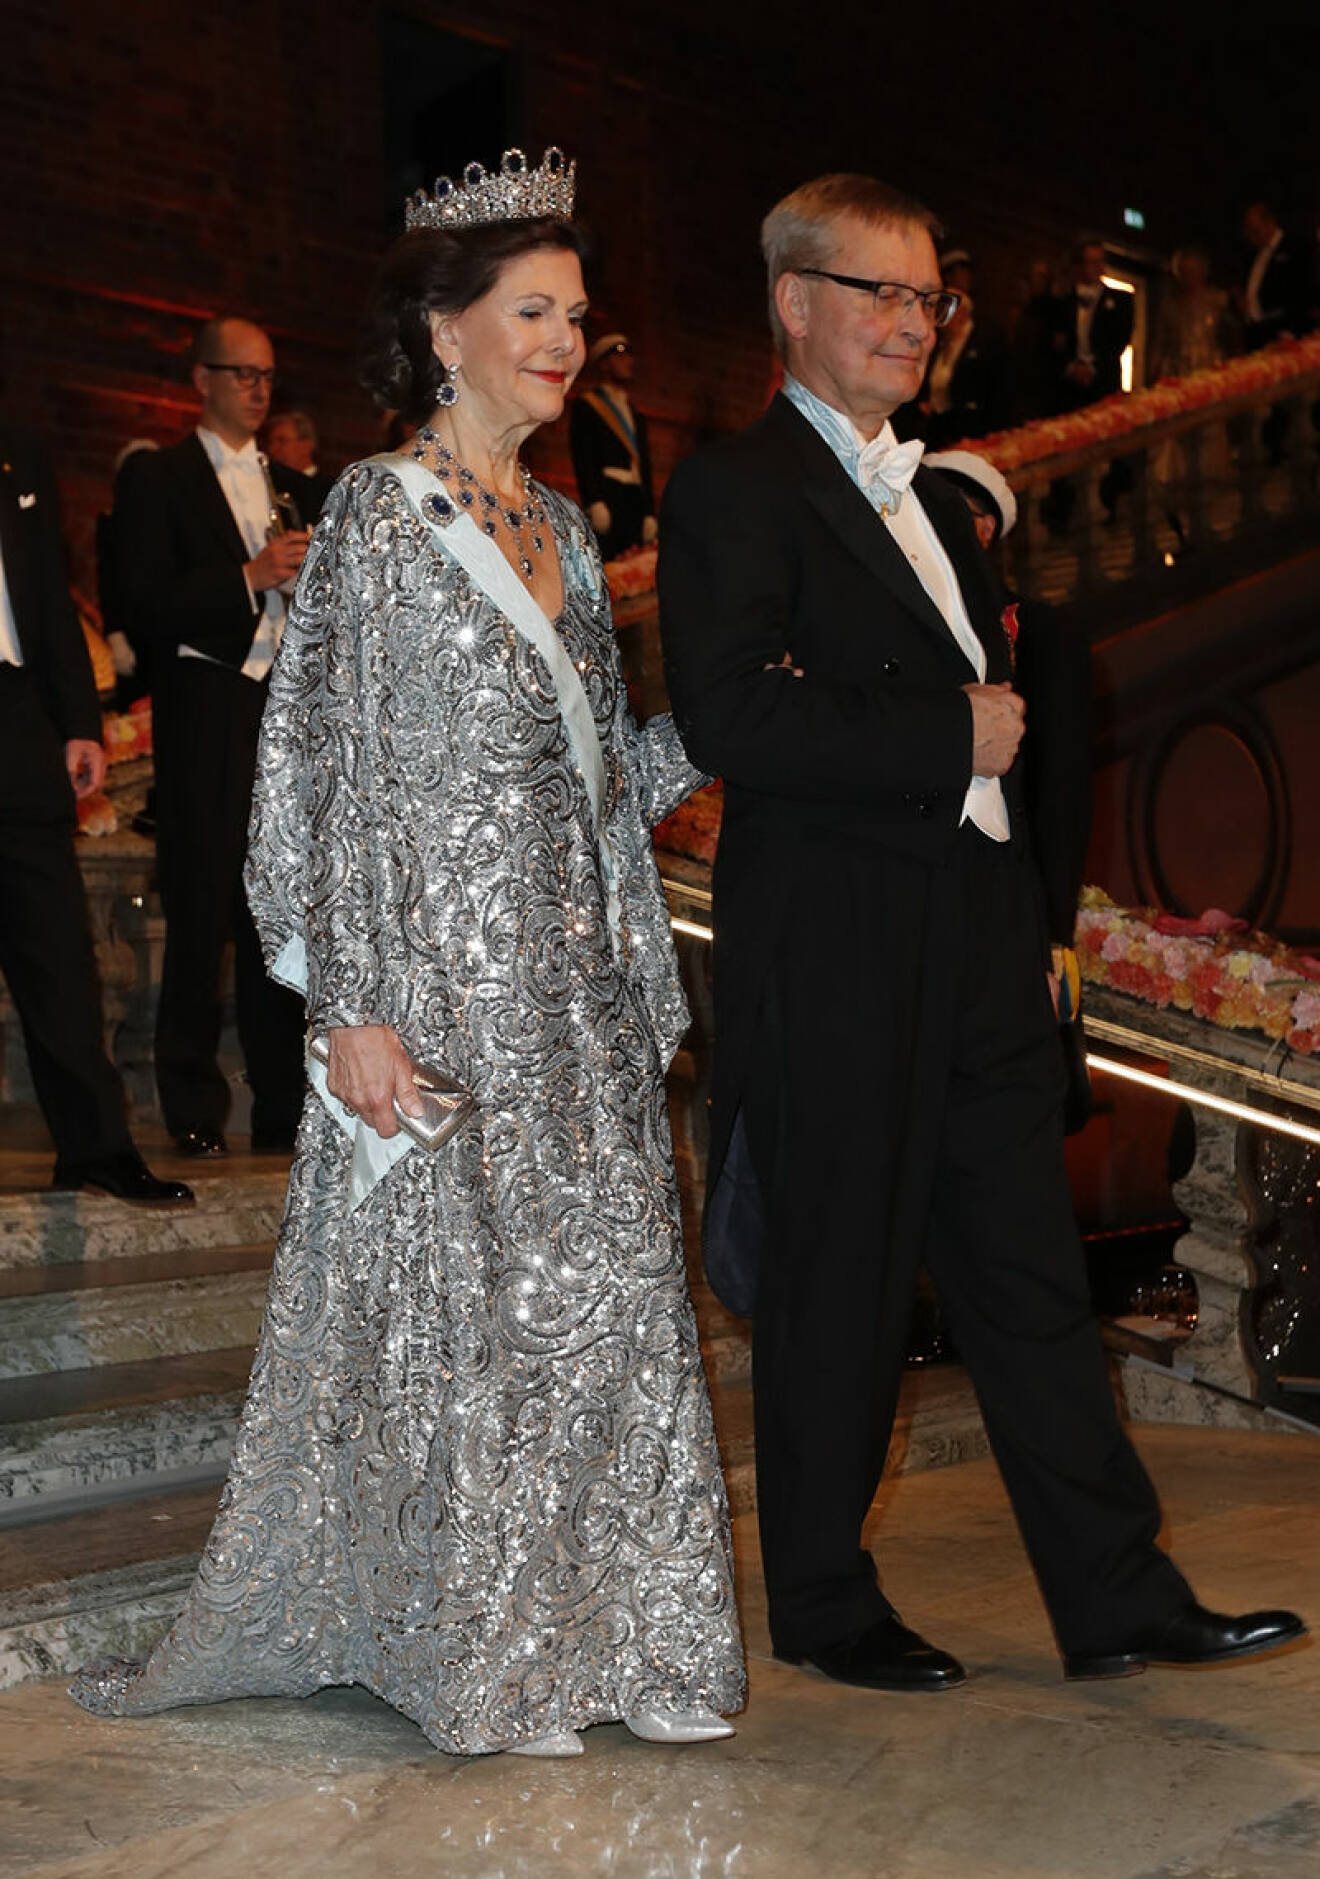 6849521 STOCKHOLM 2016-12-10. The Nobel Prize 2016. The Nobel Banquet held in the Blue Hall of the Stockholm City Hall. Picture shows: Queen Silvia of Sweden. COPYRIGHT STELLA PICTURES